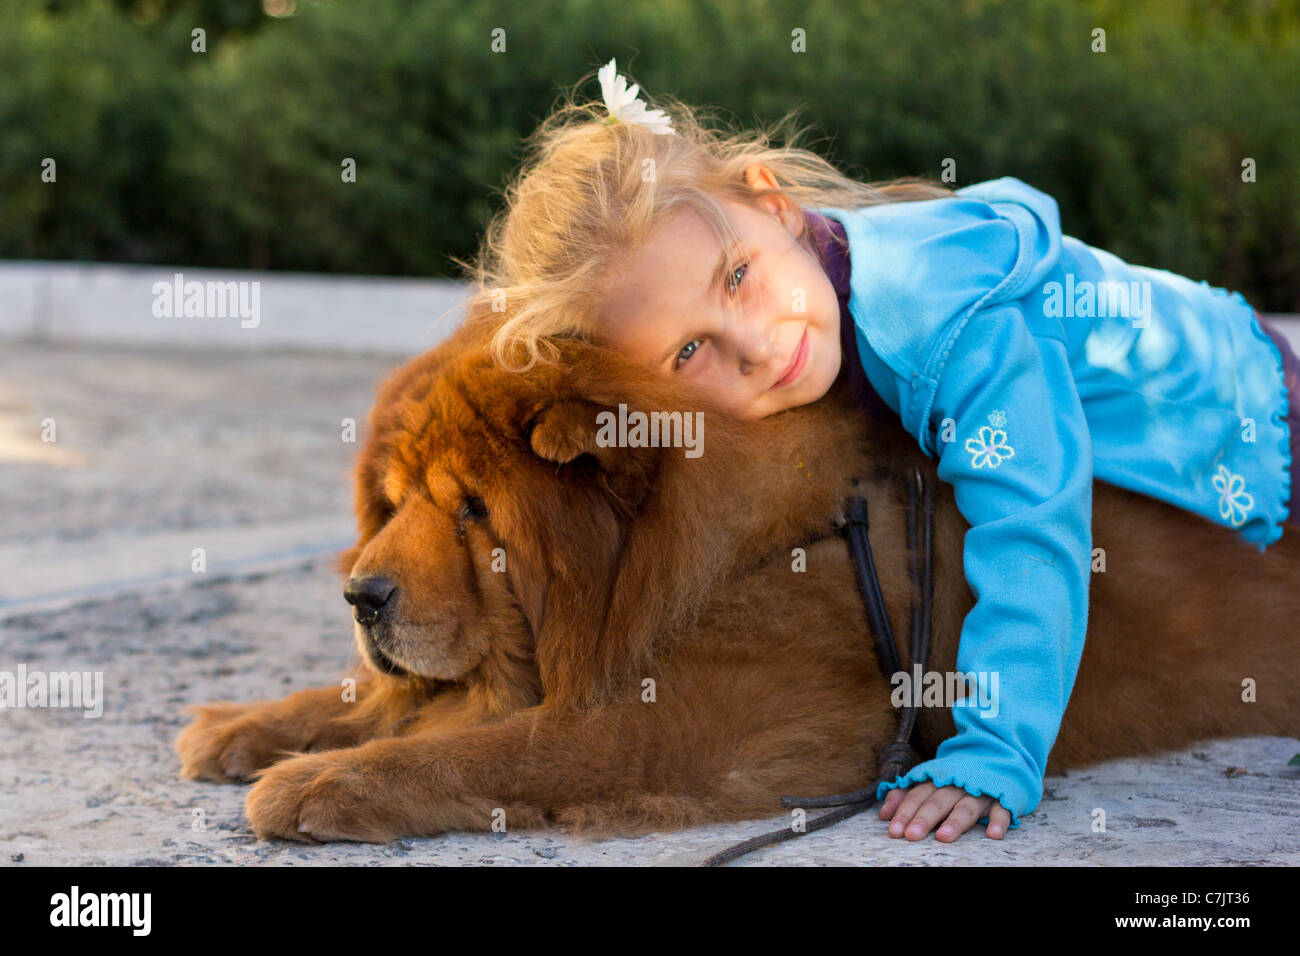 Cute child with chow-chow dog outdoor Stock Photo